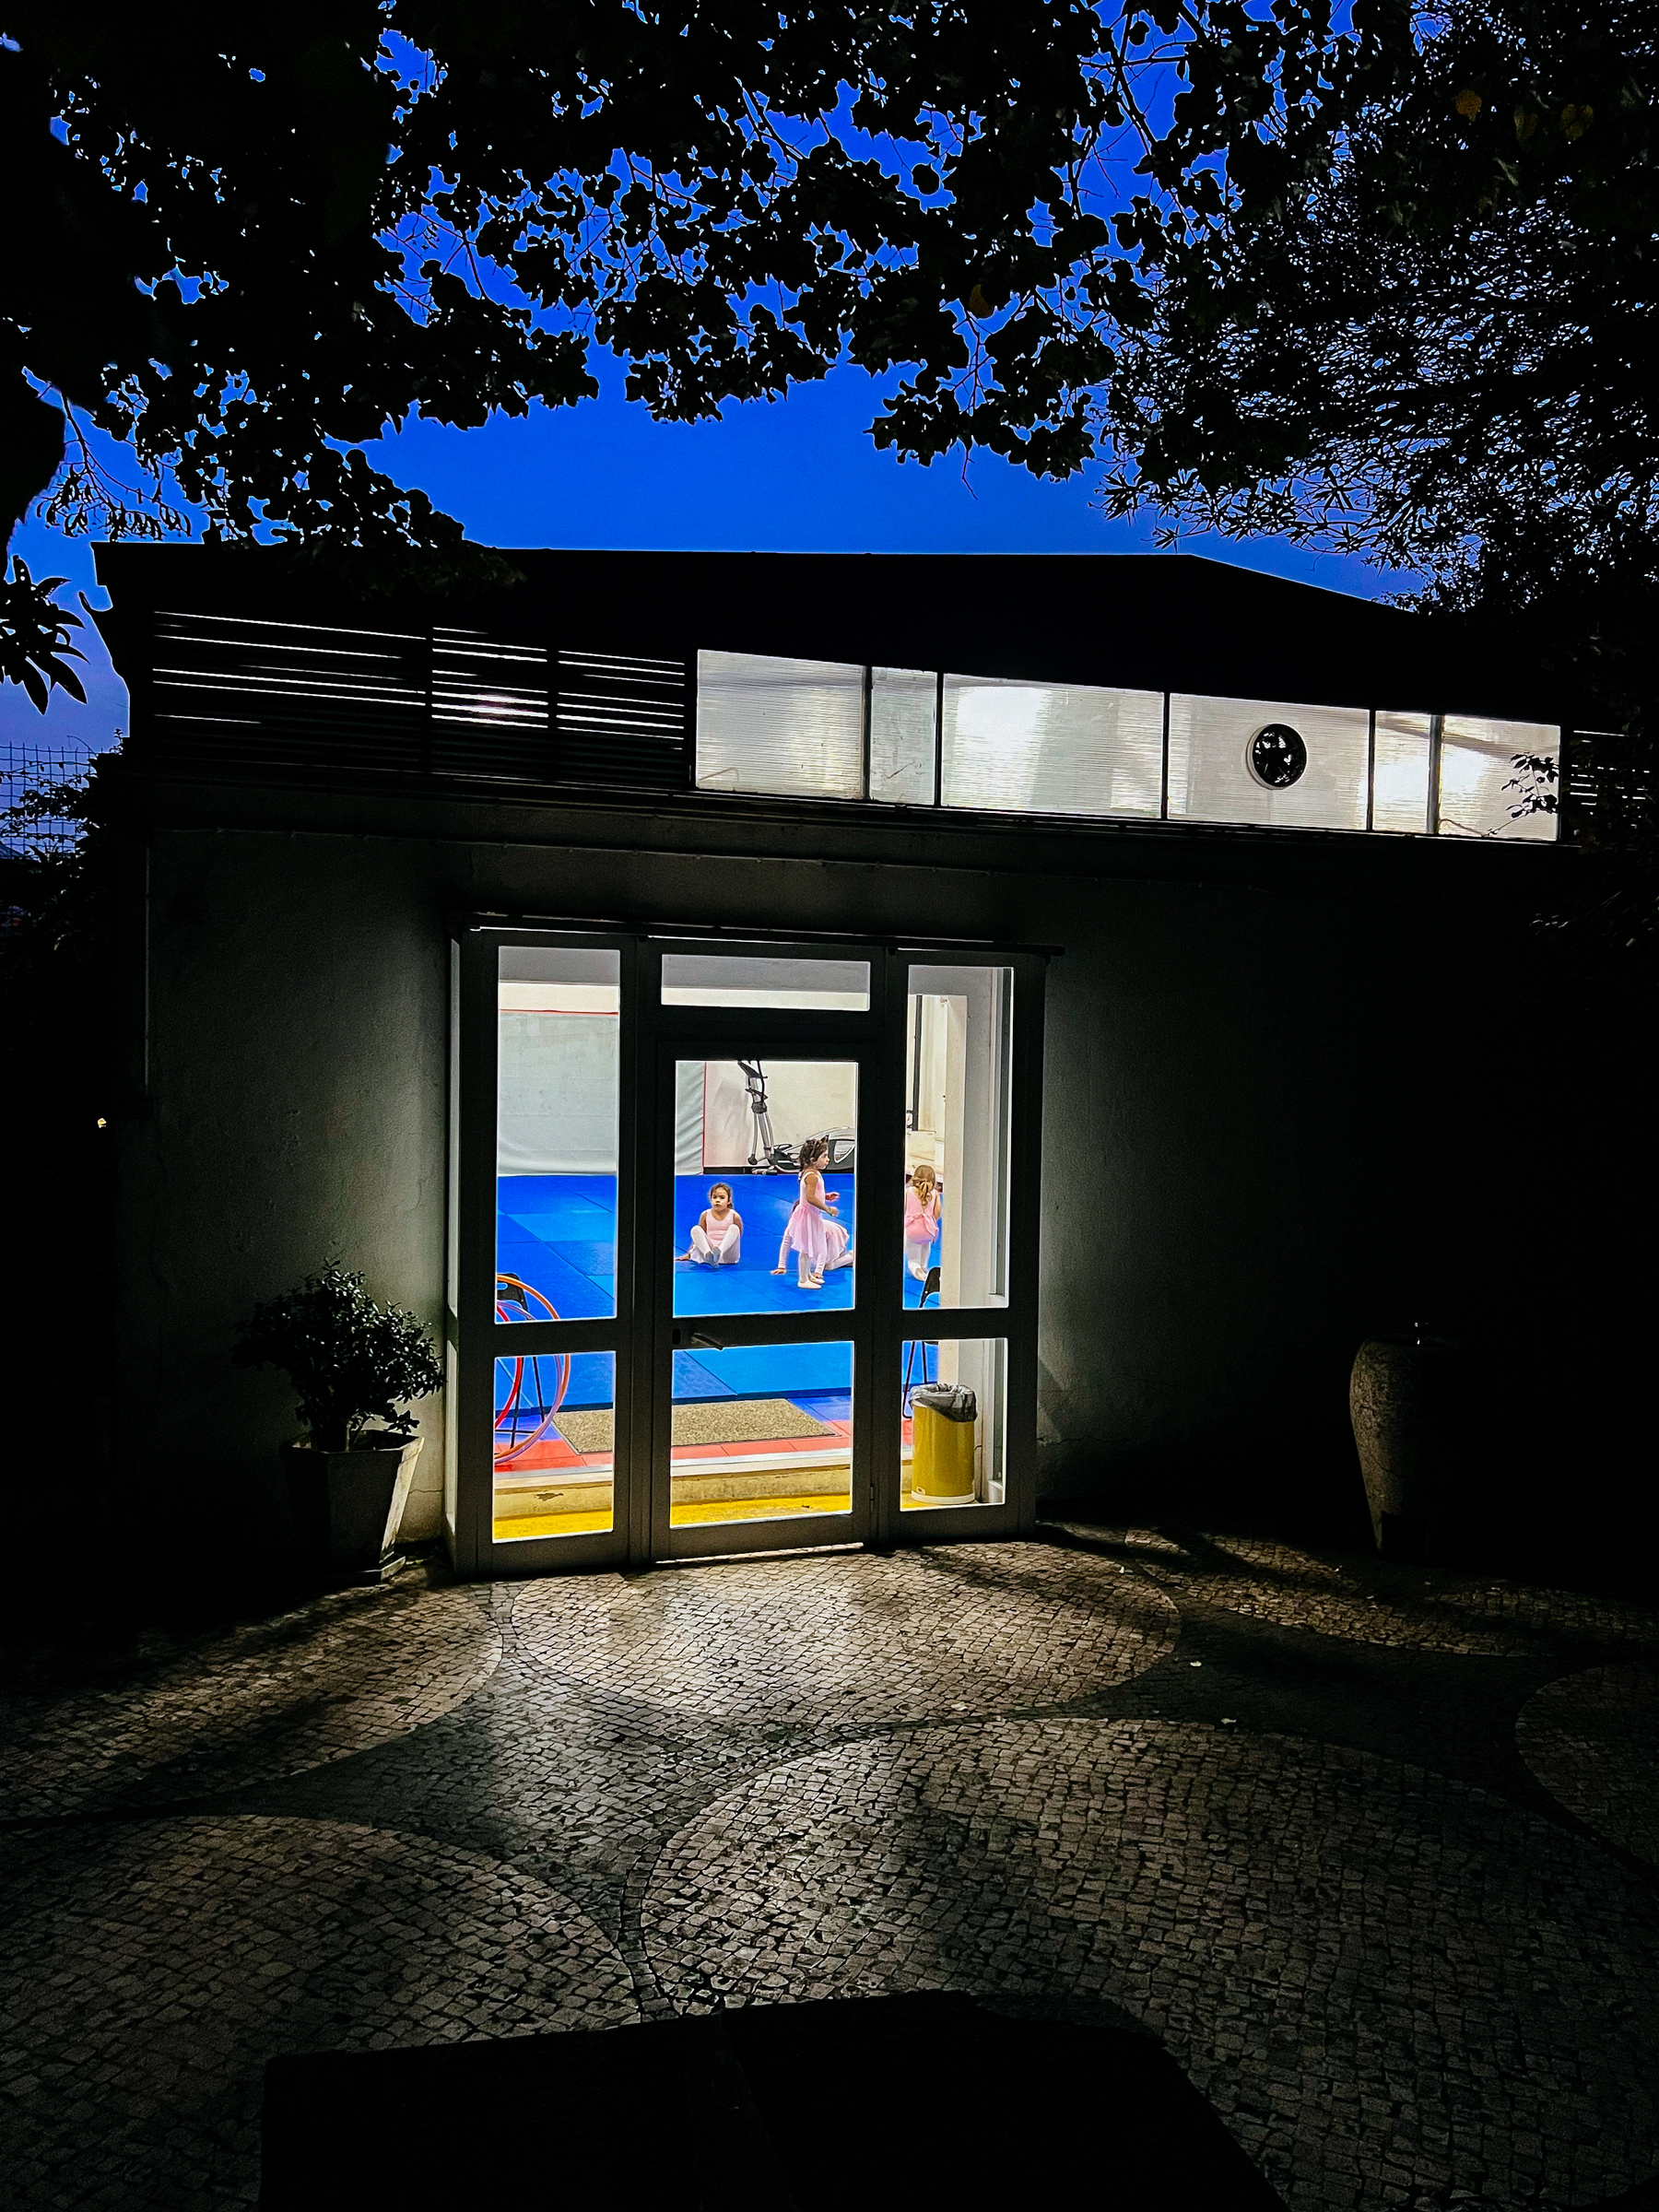 A ballet studio, seen from the outside, right after sunset.